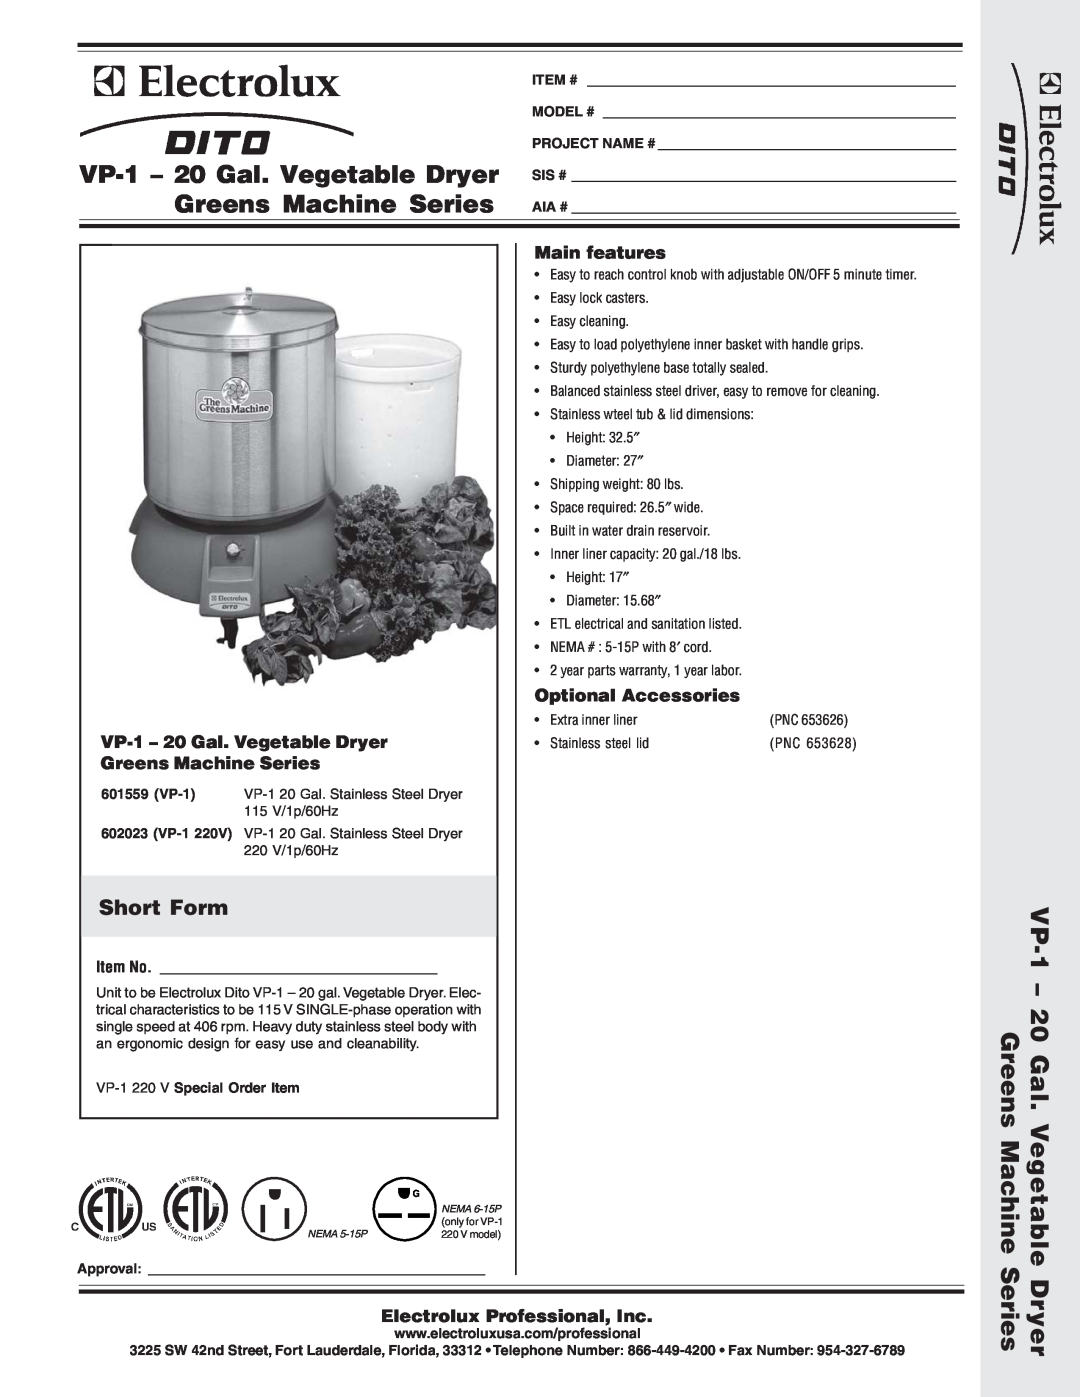 Electrolux 602023 dimensions Short Form, VP-1 - 20 Gal. Vegetable Dryer Greens Machine Series, Main features, Item No 